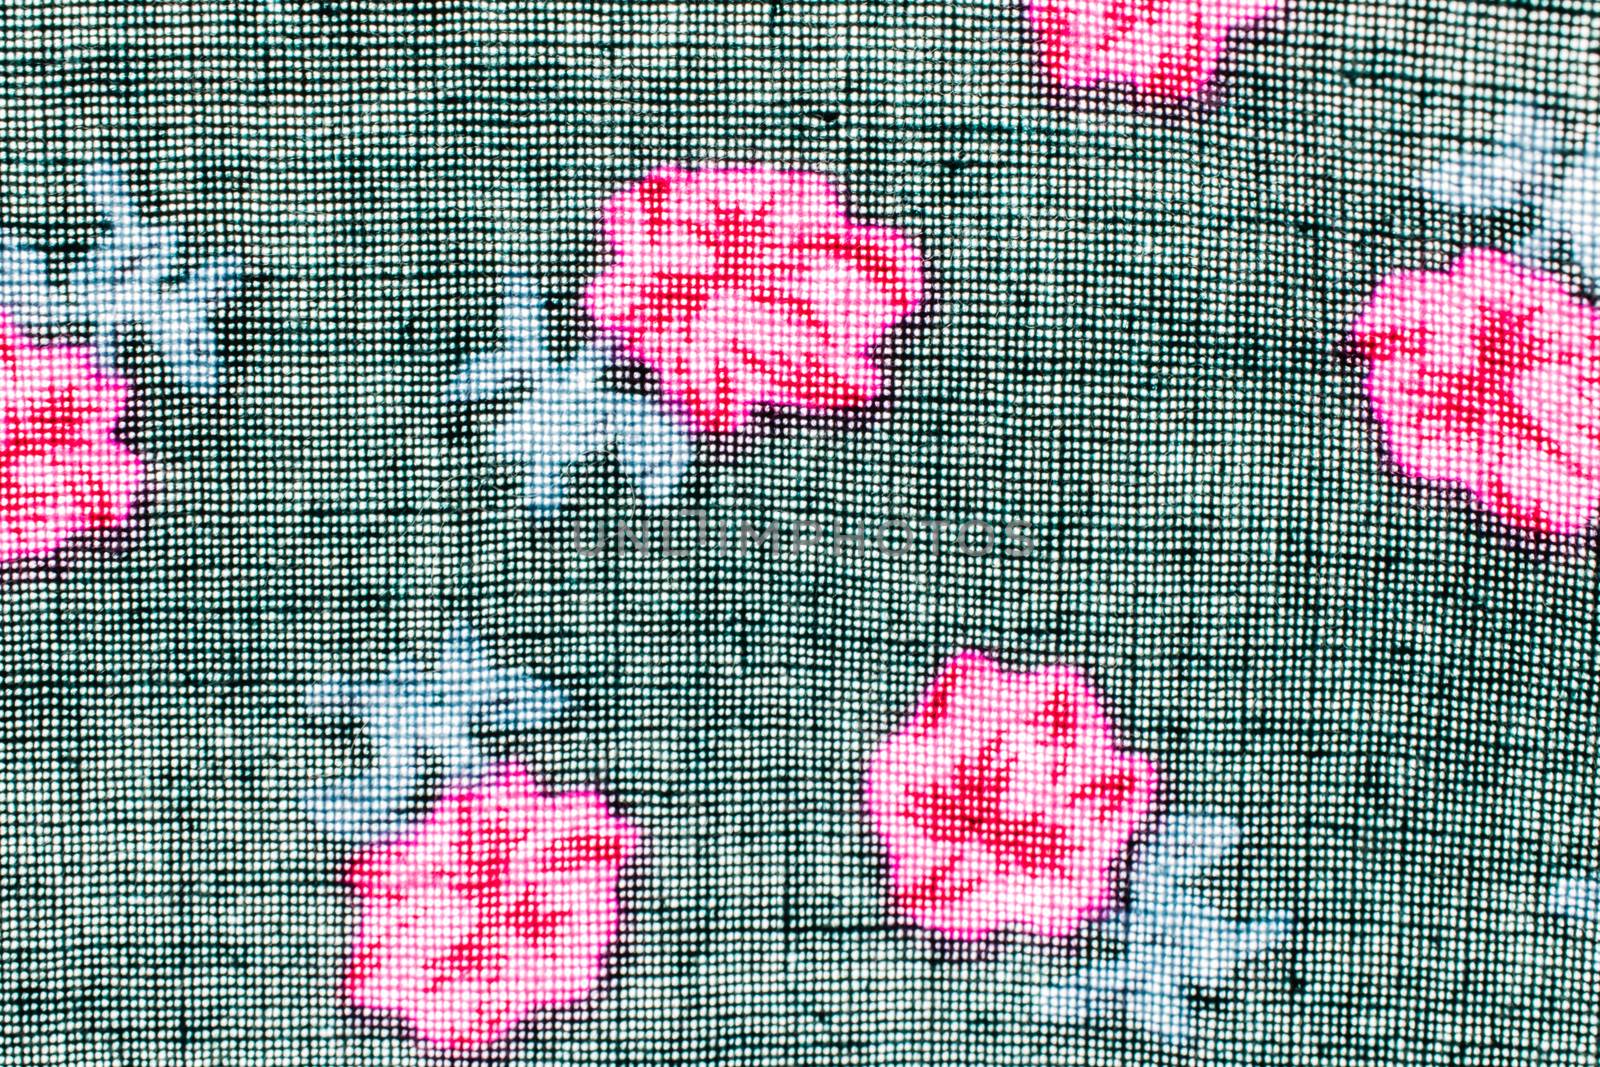 texture,print and wale of fabric black and pink flowers pattern by pitchaphan